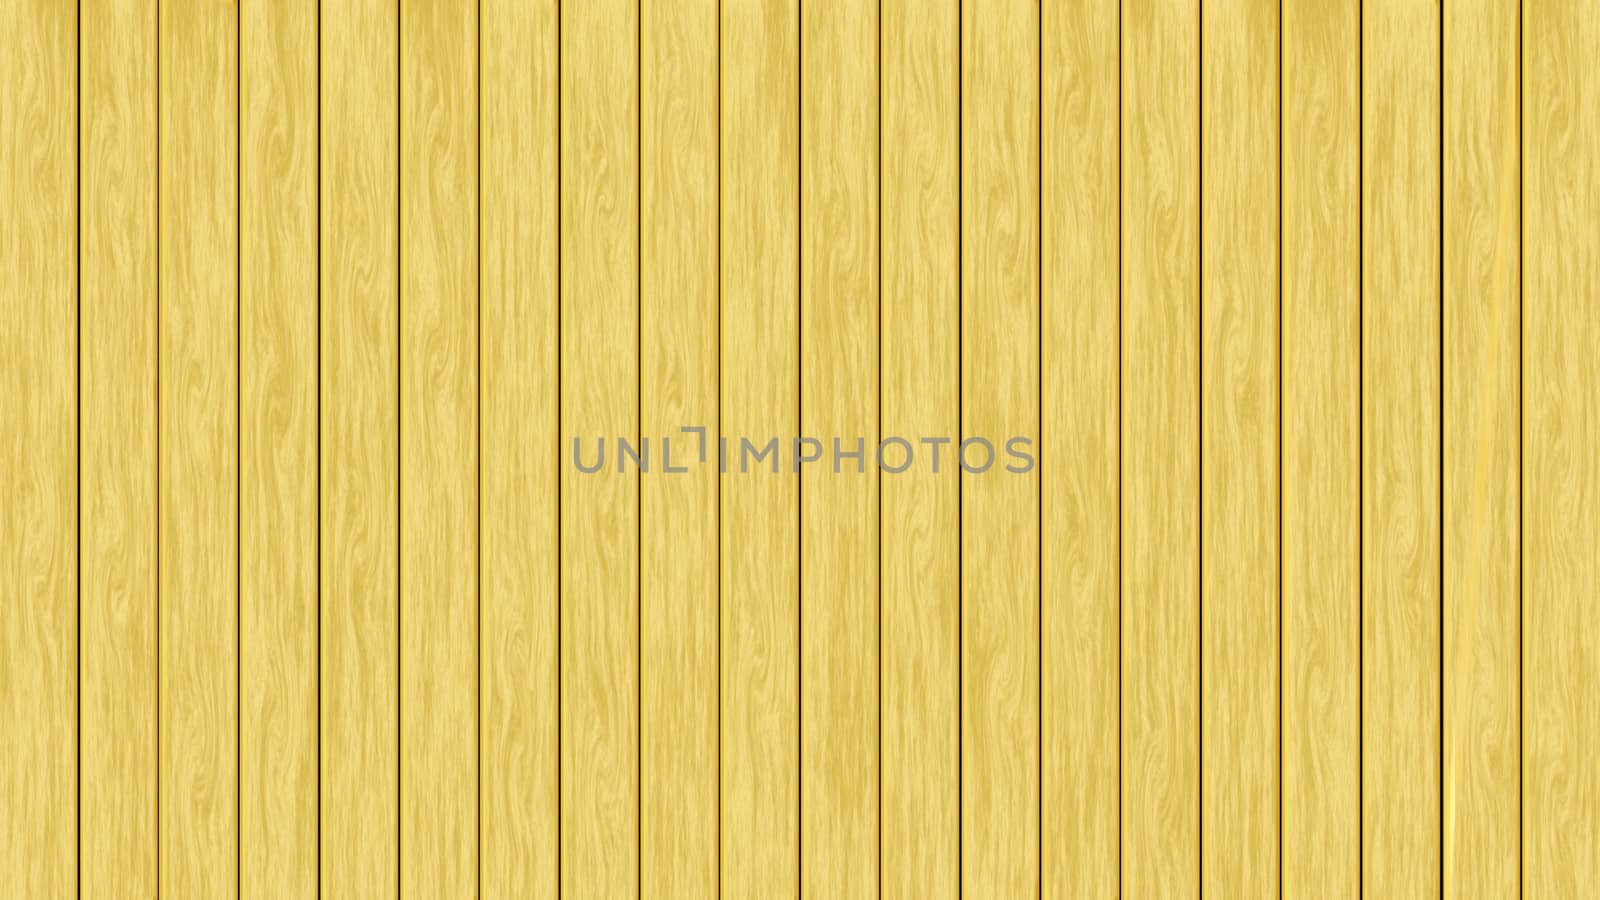 Wood plank texture background by Chattranusorn09